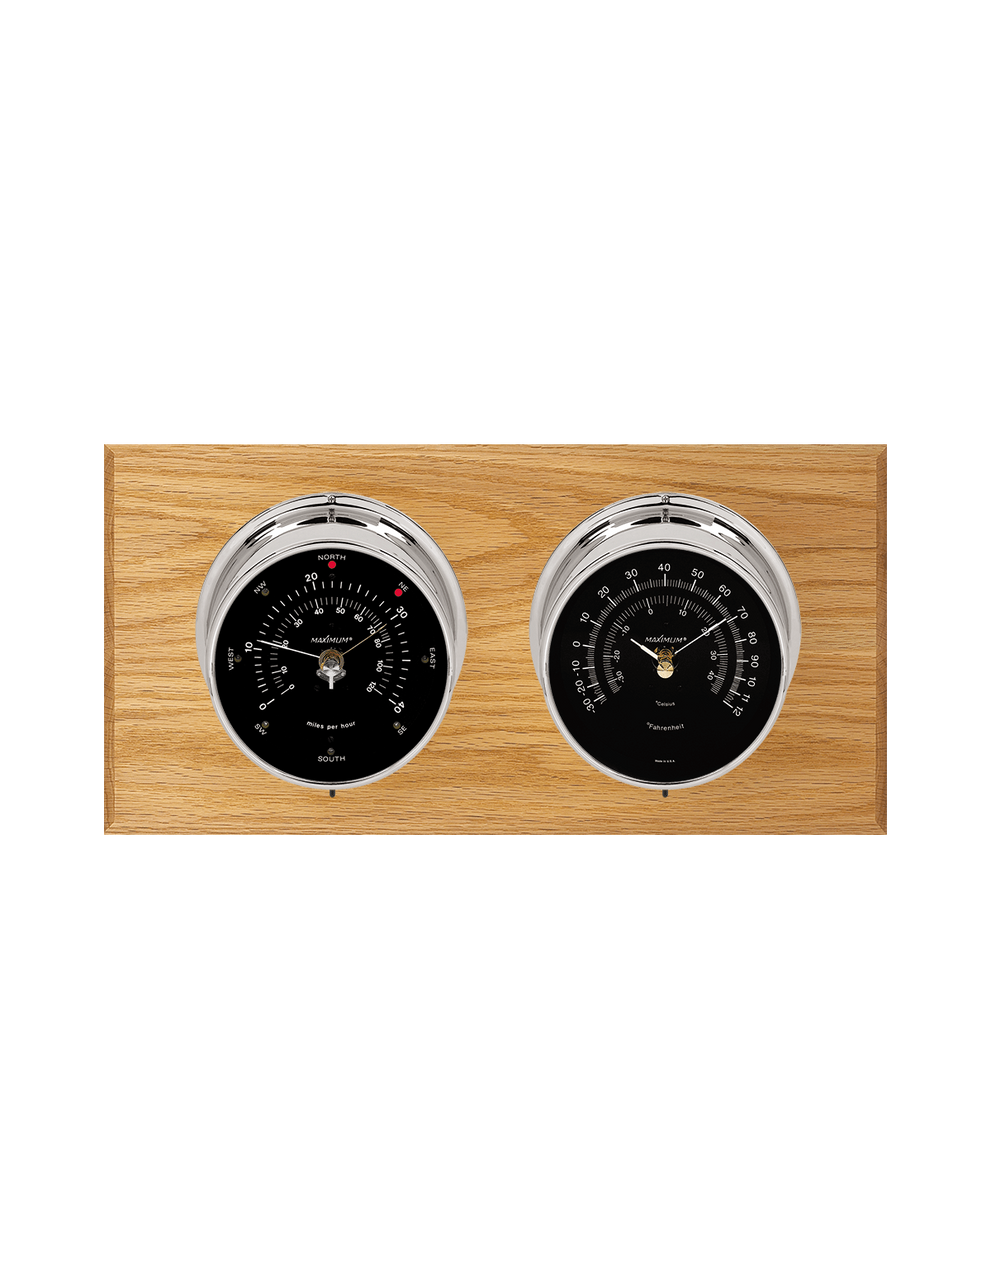  Catalina Wind and Temperature Weather Station - 2 Instruments - Polished Chrome Cases  - Oak Wood - Black Face -   2 Scales -Reads 0-120 mph  